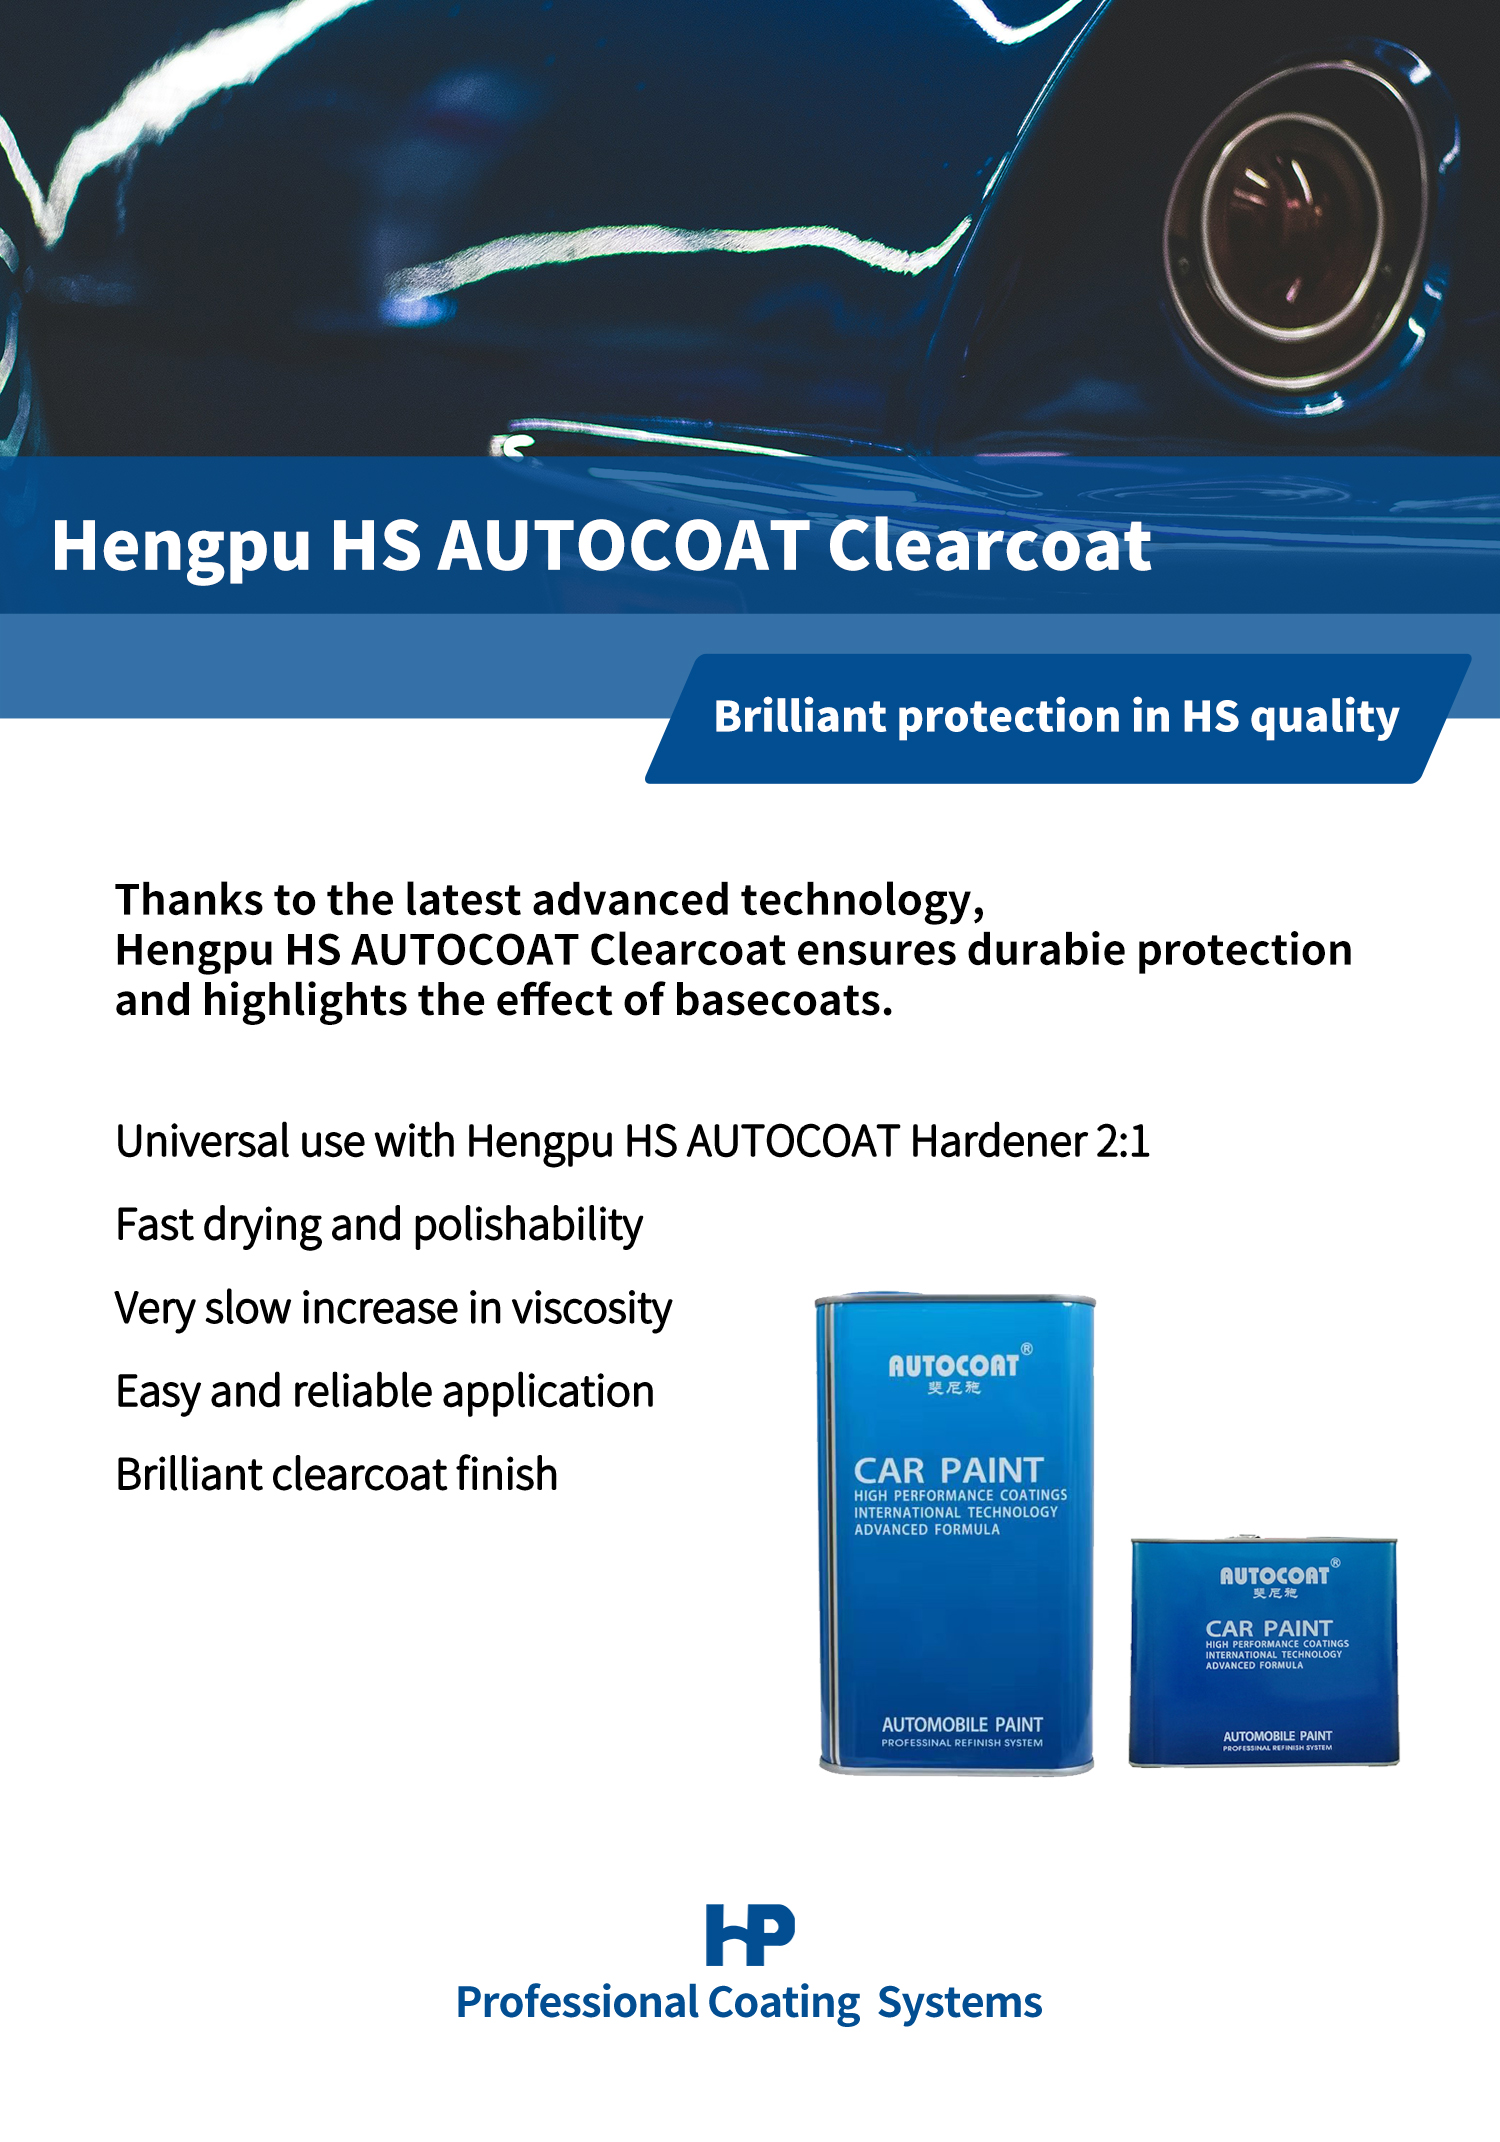 High Application High Gloss Auto Paint Easy Operation High Plumpness Car Paint BABOSEN HS Highlighting Clearcoat